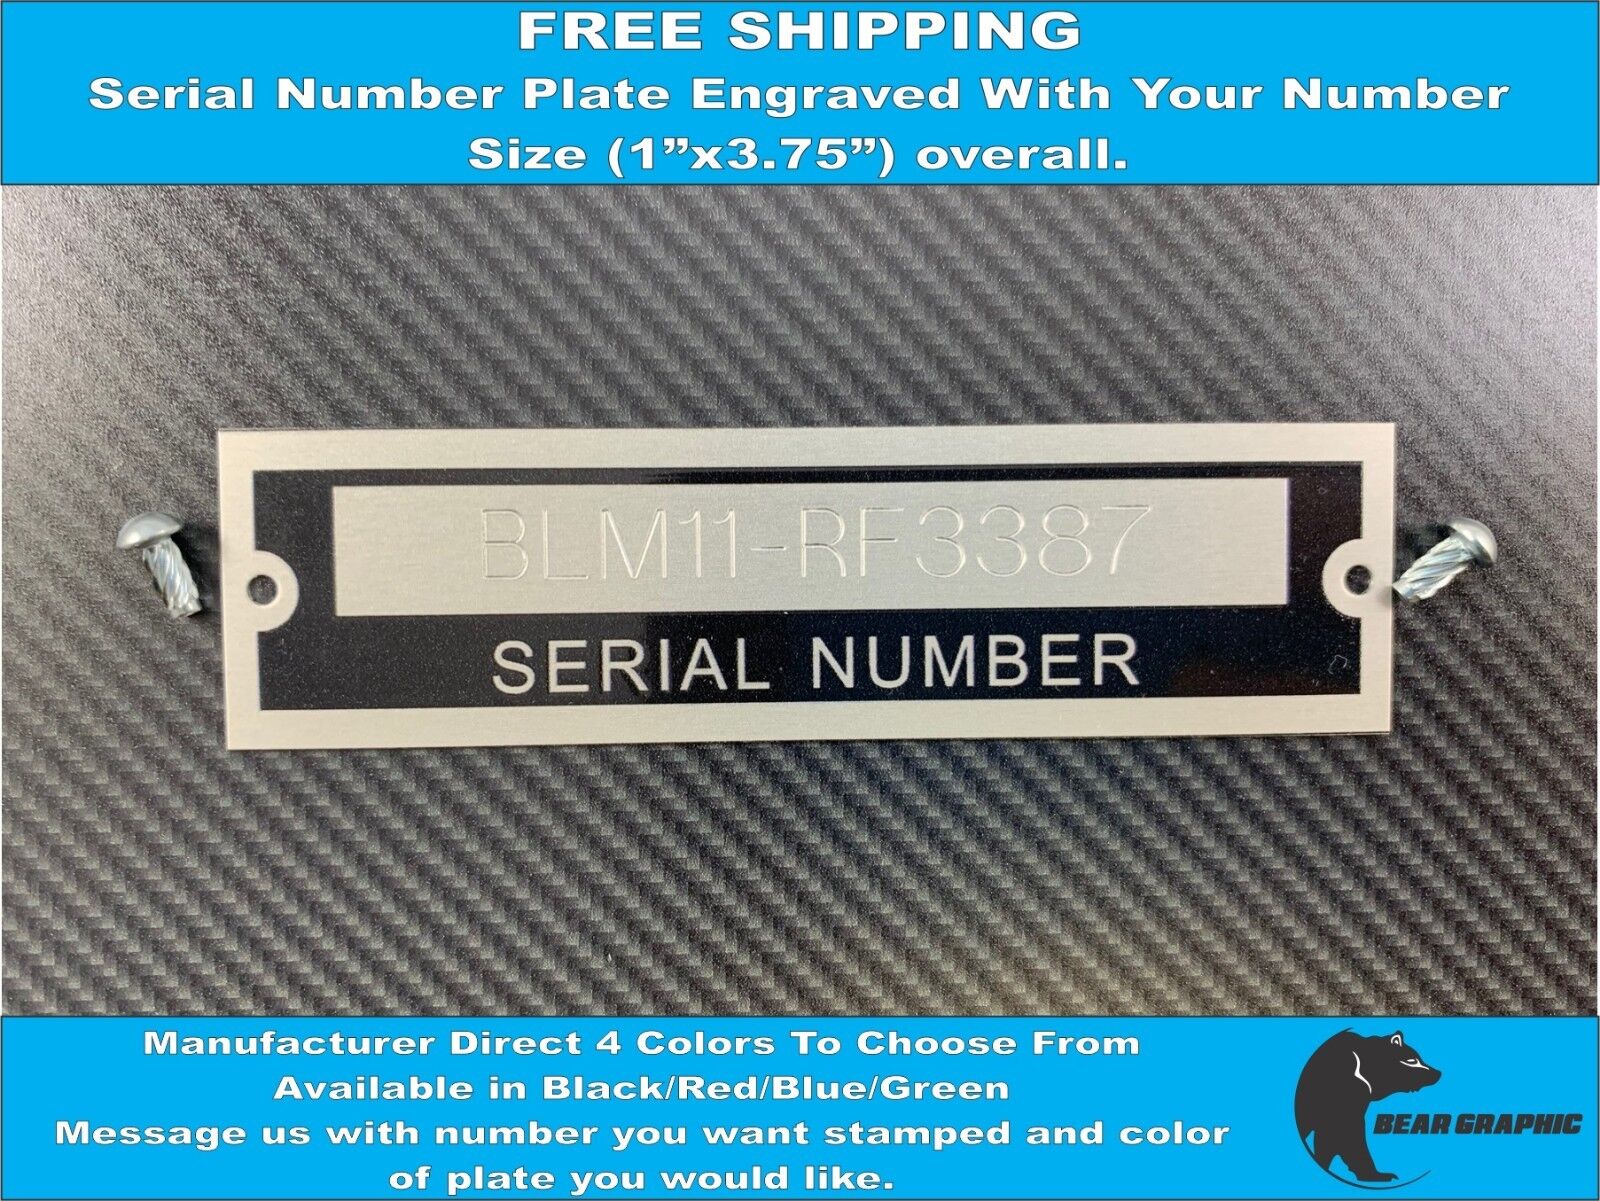 SERIAL NUMBER TAG PLATE ENGRAVED WITH NUMBER IDENTIFICATION ASSET TAG 